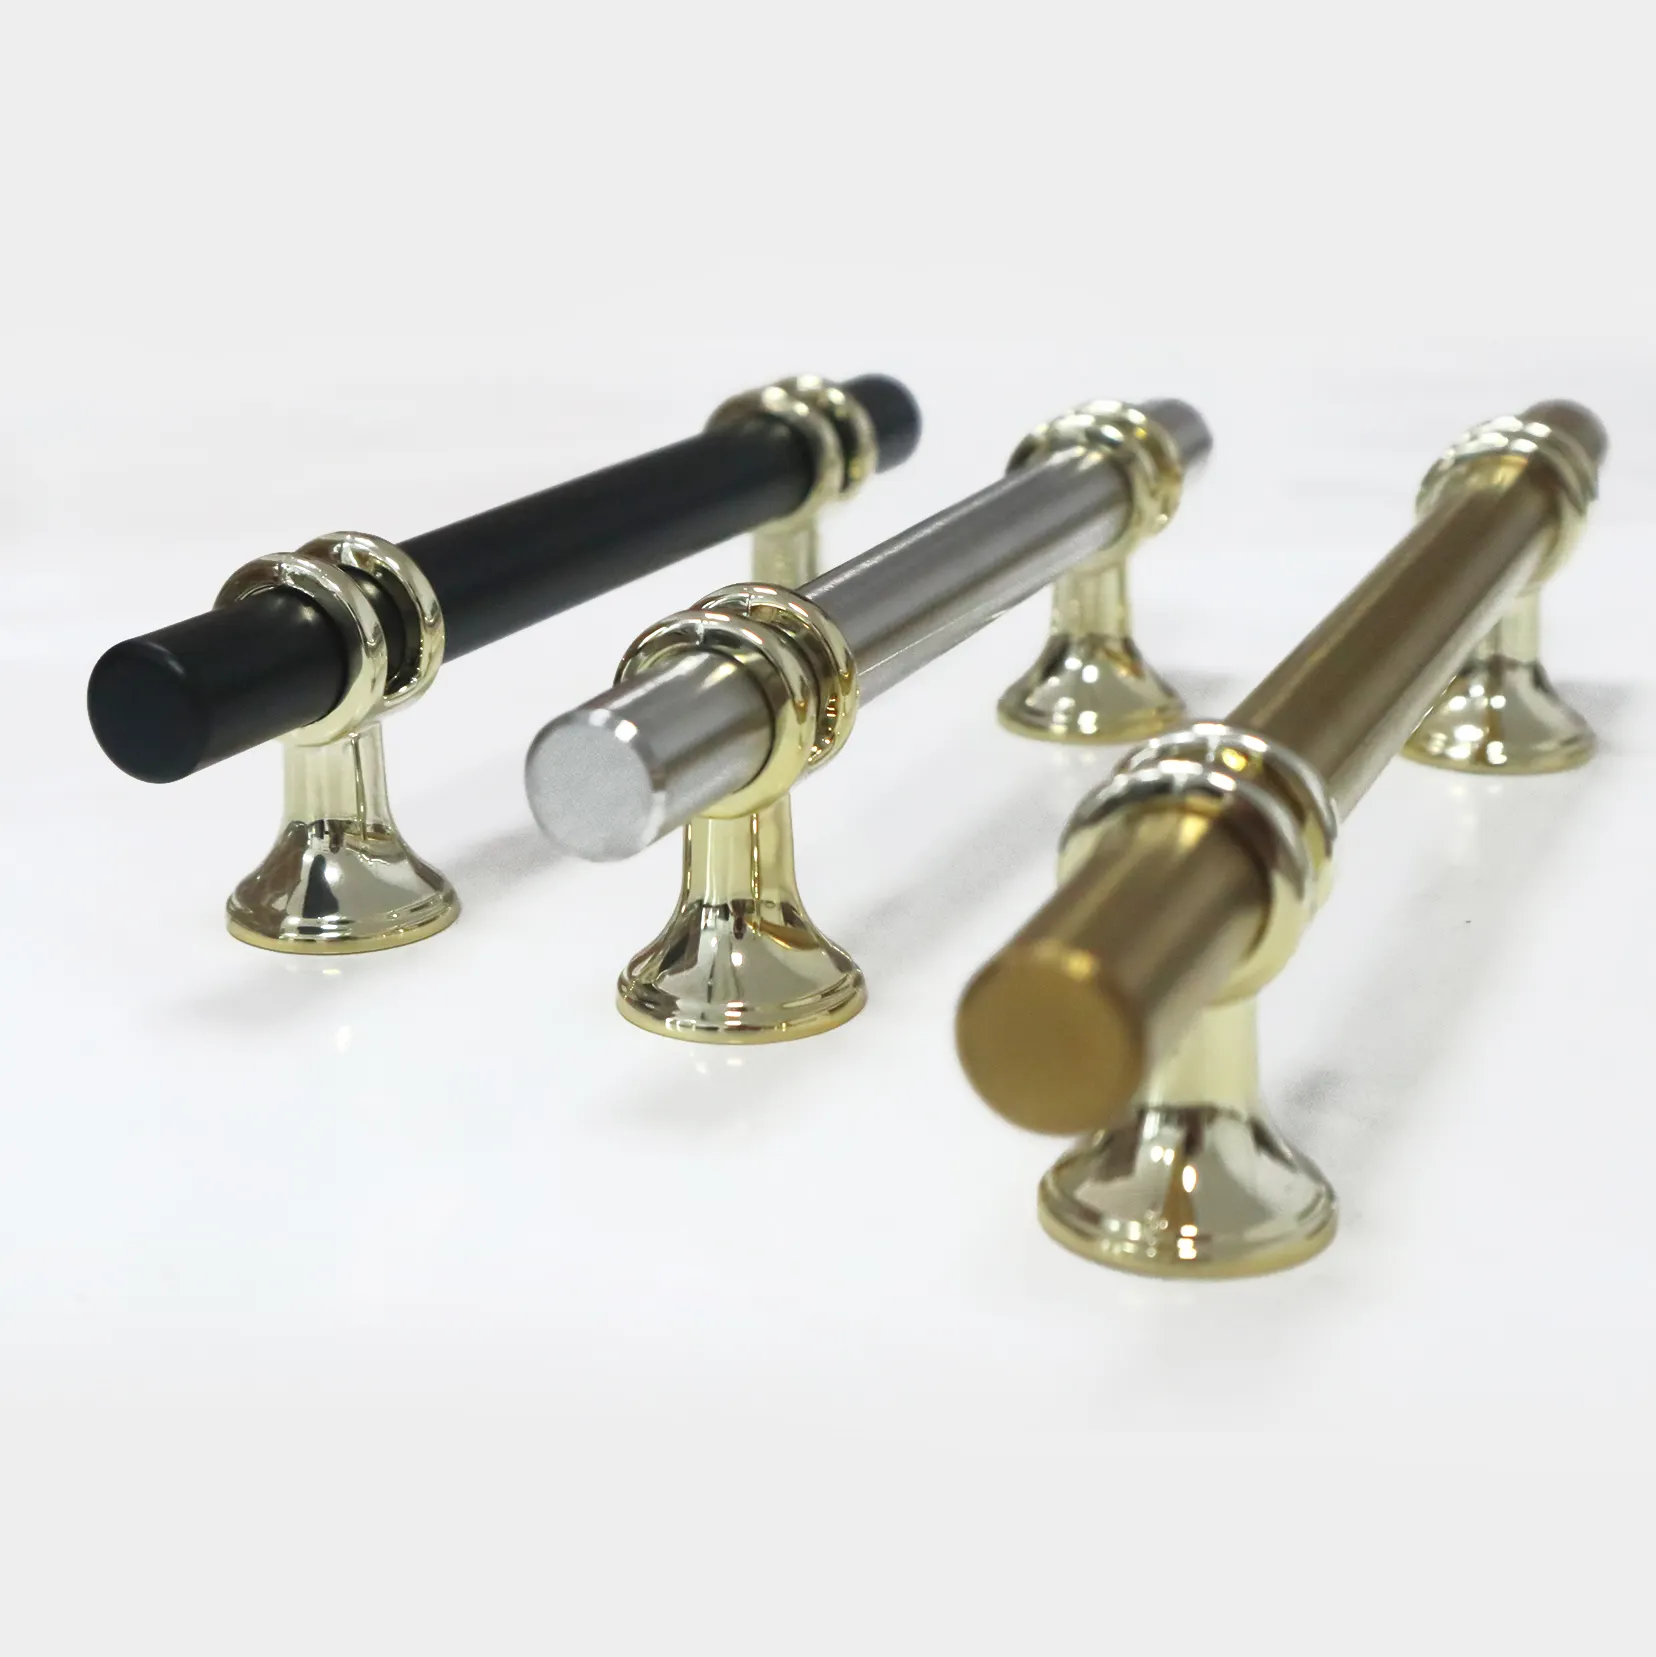 Stainless Steel Simple Furniture Drawer Handles Black Gold Hollow T Bar Cabinet Handle